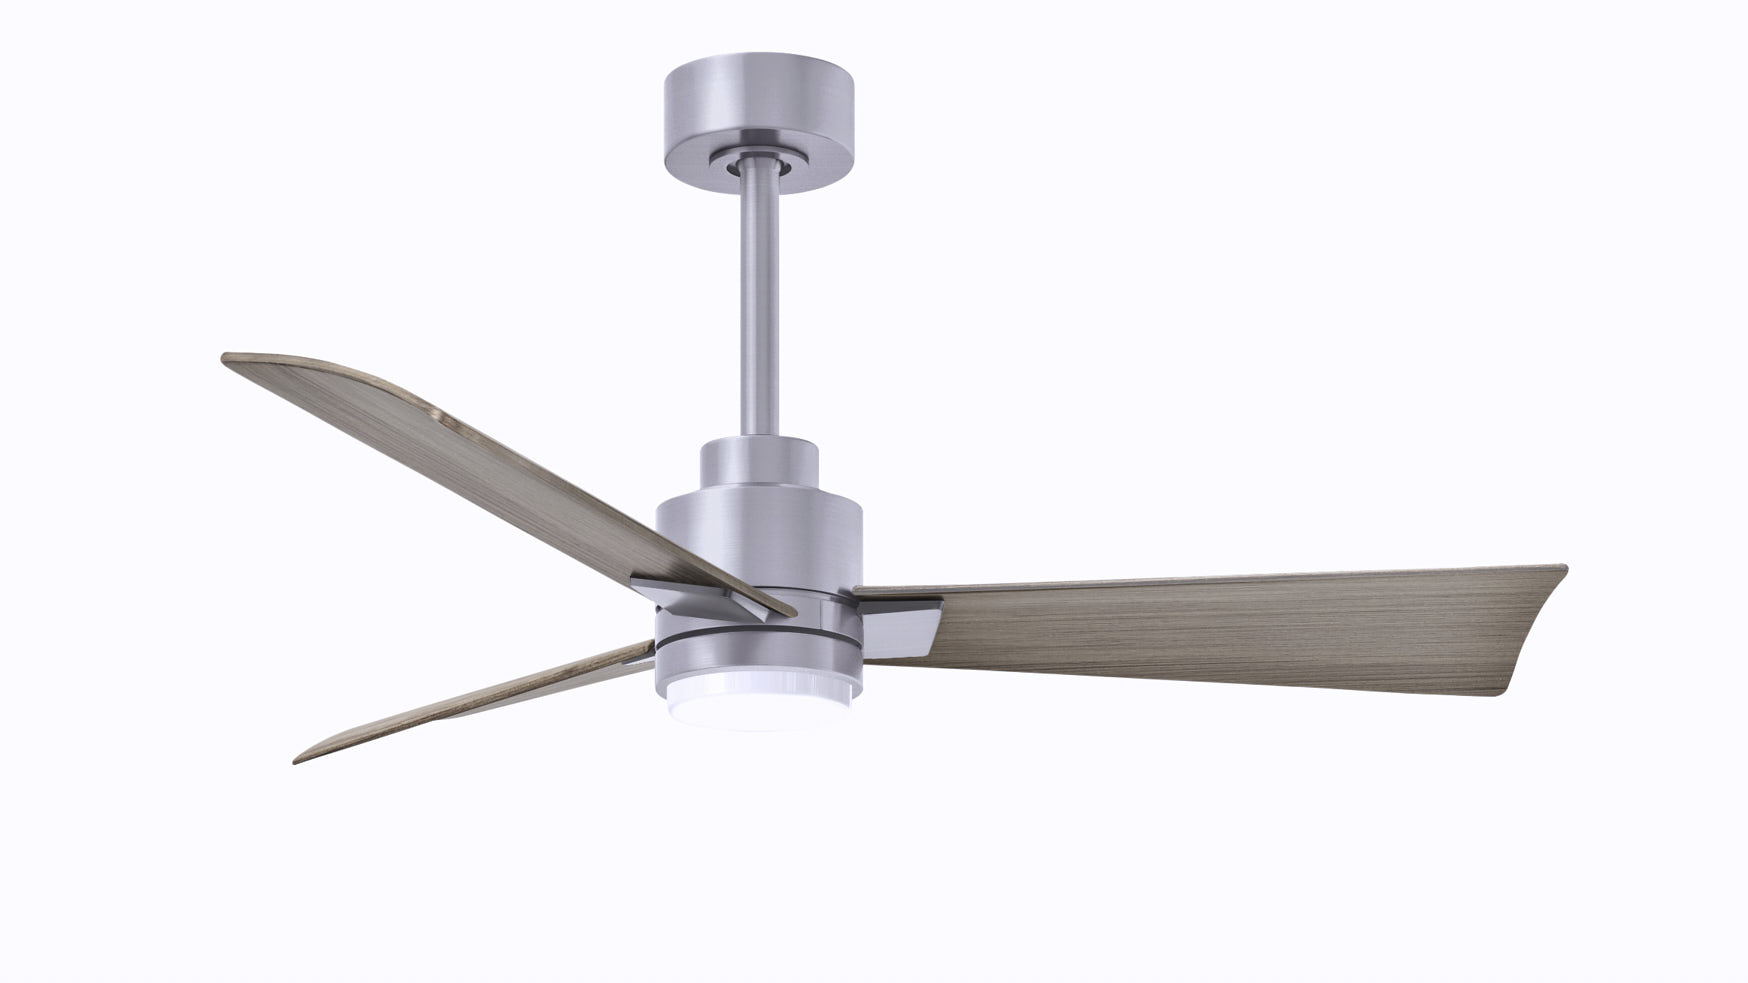 Alessandra-LK ceiling fan in brushed nickel finish with 42